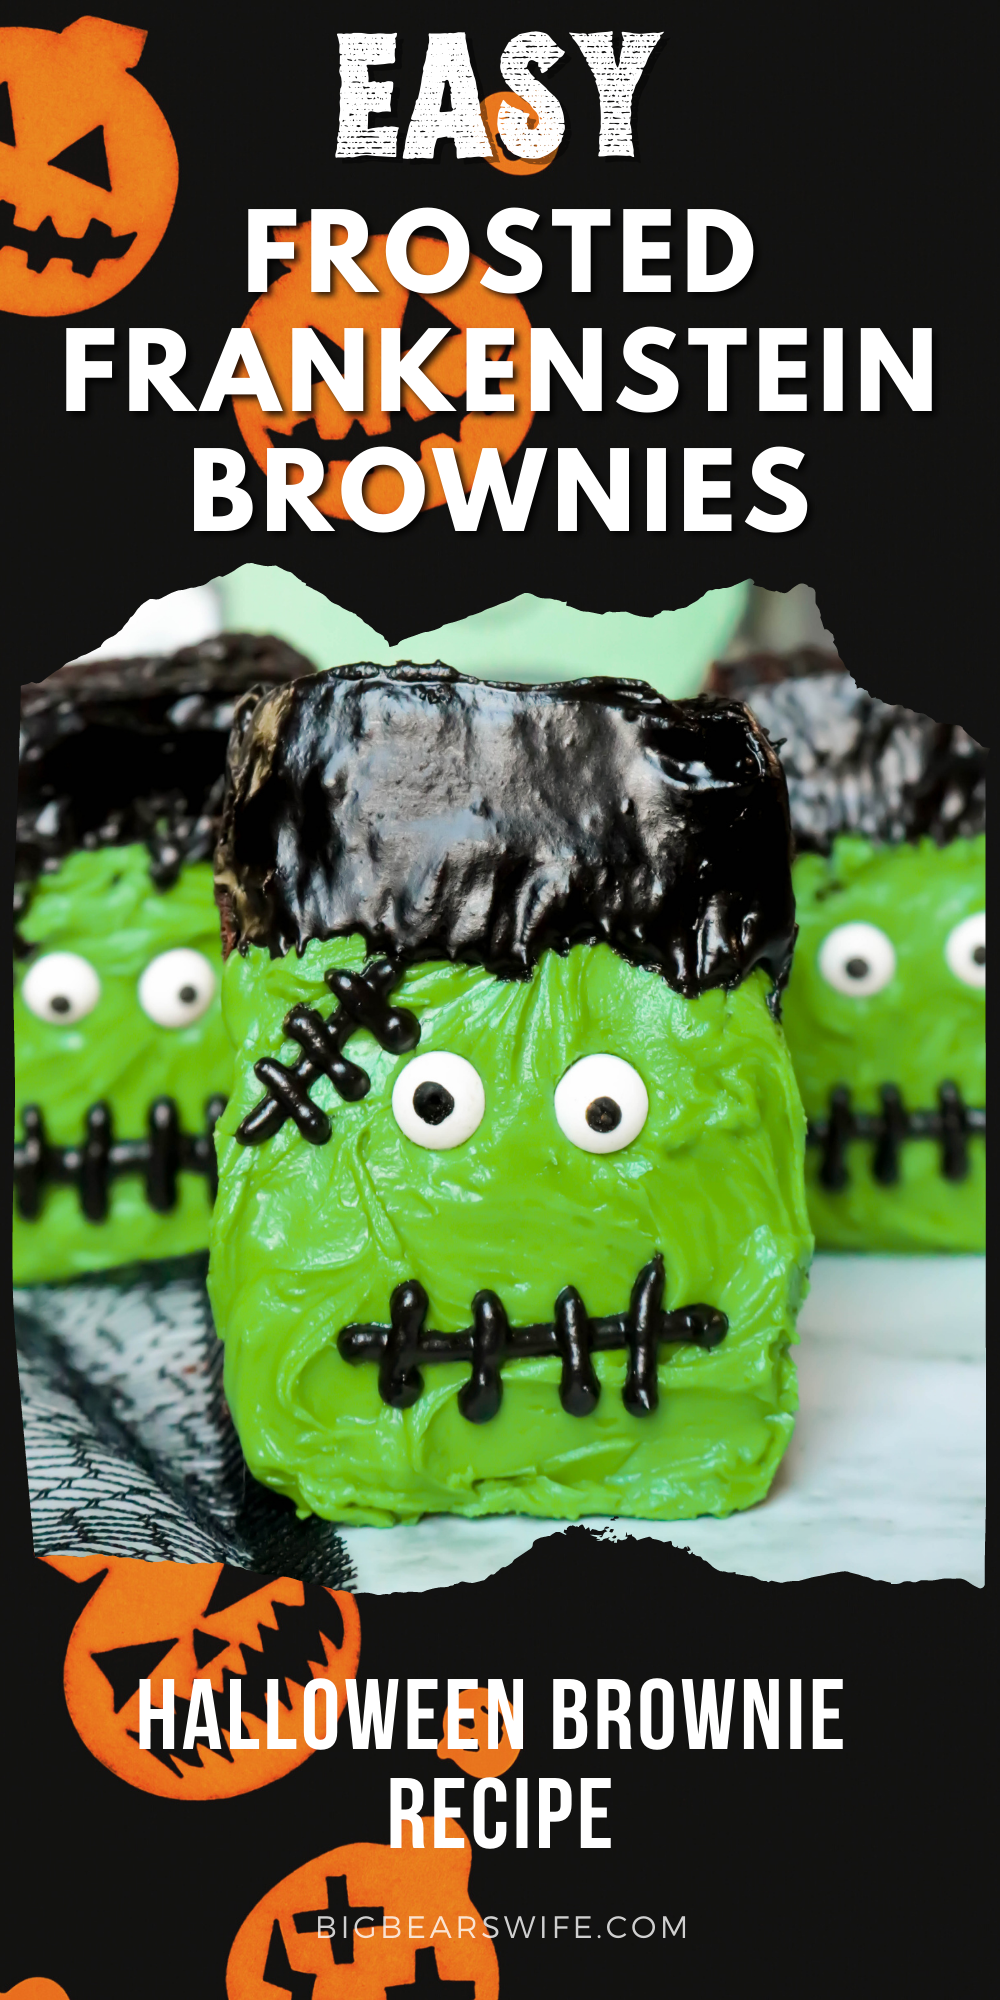 Frosted Frankenstein Brownies are perfect for boxed brownie or homemade brownies with my favorite brownie recipe. Use a bit of frosting and candy eyes to turn brownies into the cutest Halloween brownies. A great simple Halloween dessert recipe that is great for Halloween parties. Also a fun Halloween dessert to make with kids! Use store bought brownies for a quick last minute Halloween treat! via @bigbearswife